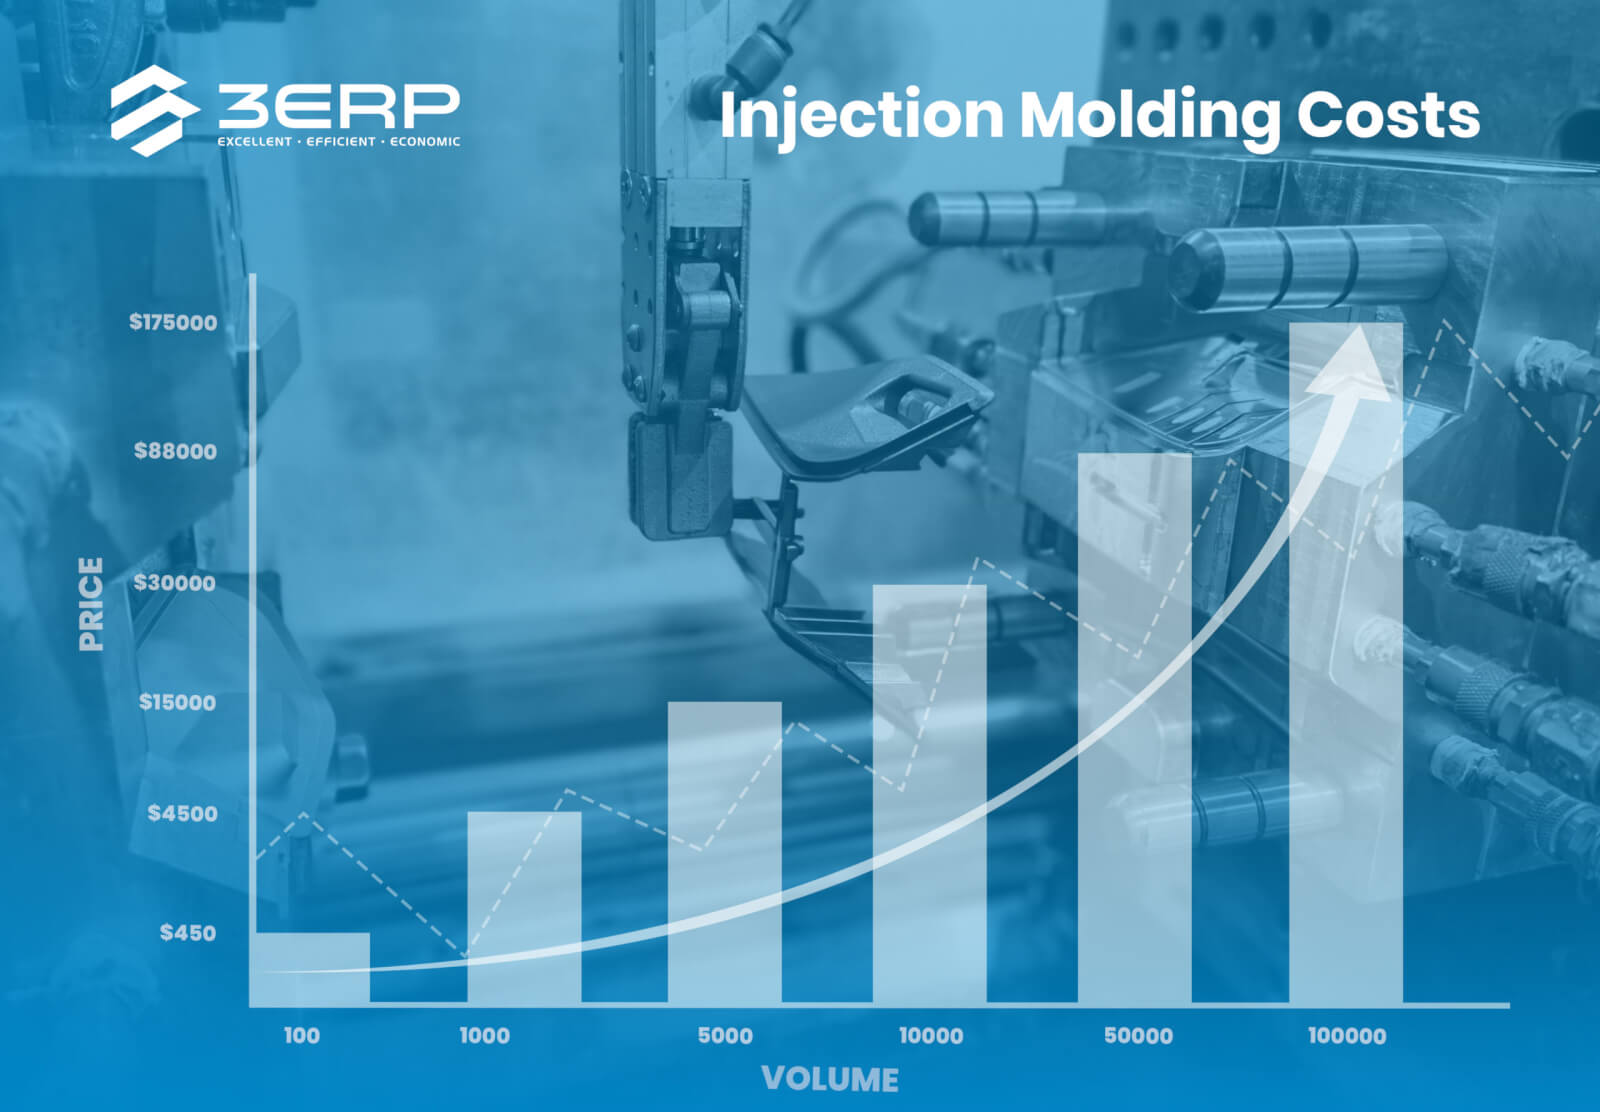 How much does injection molding cost?